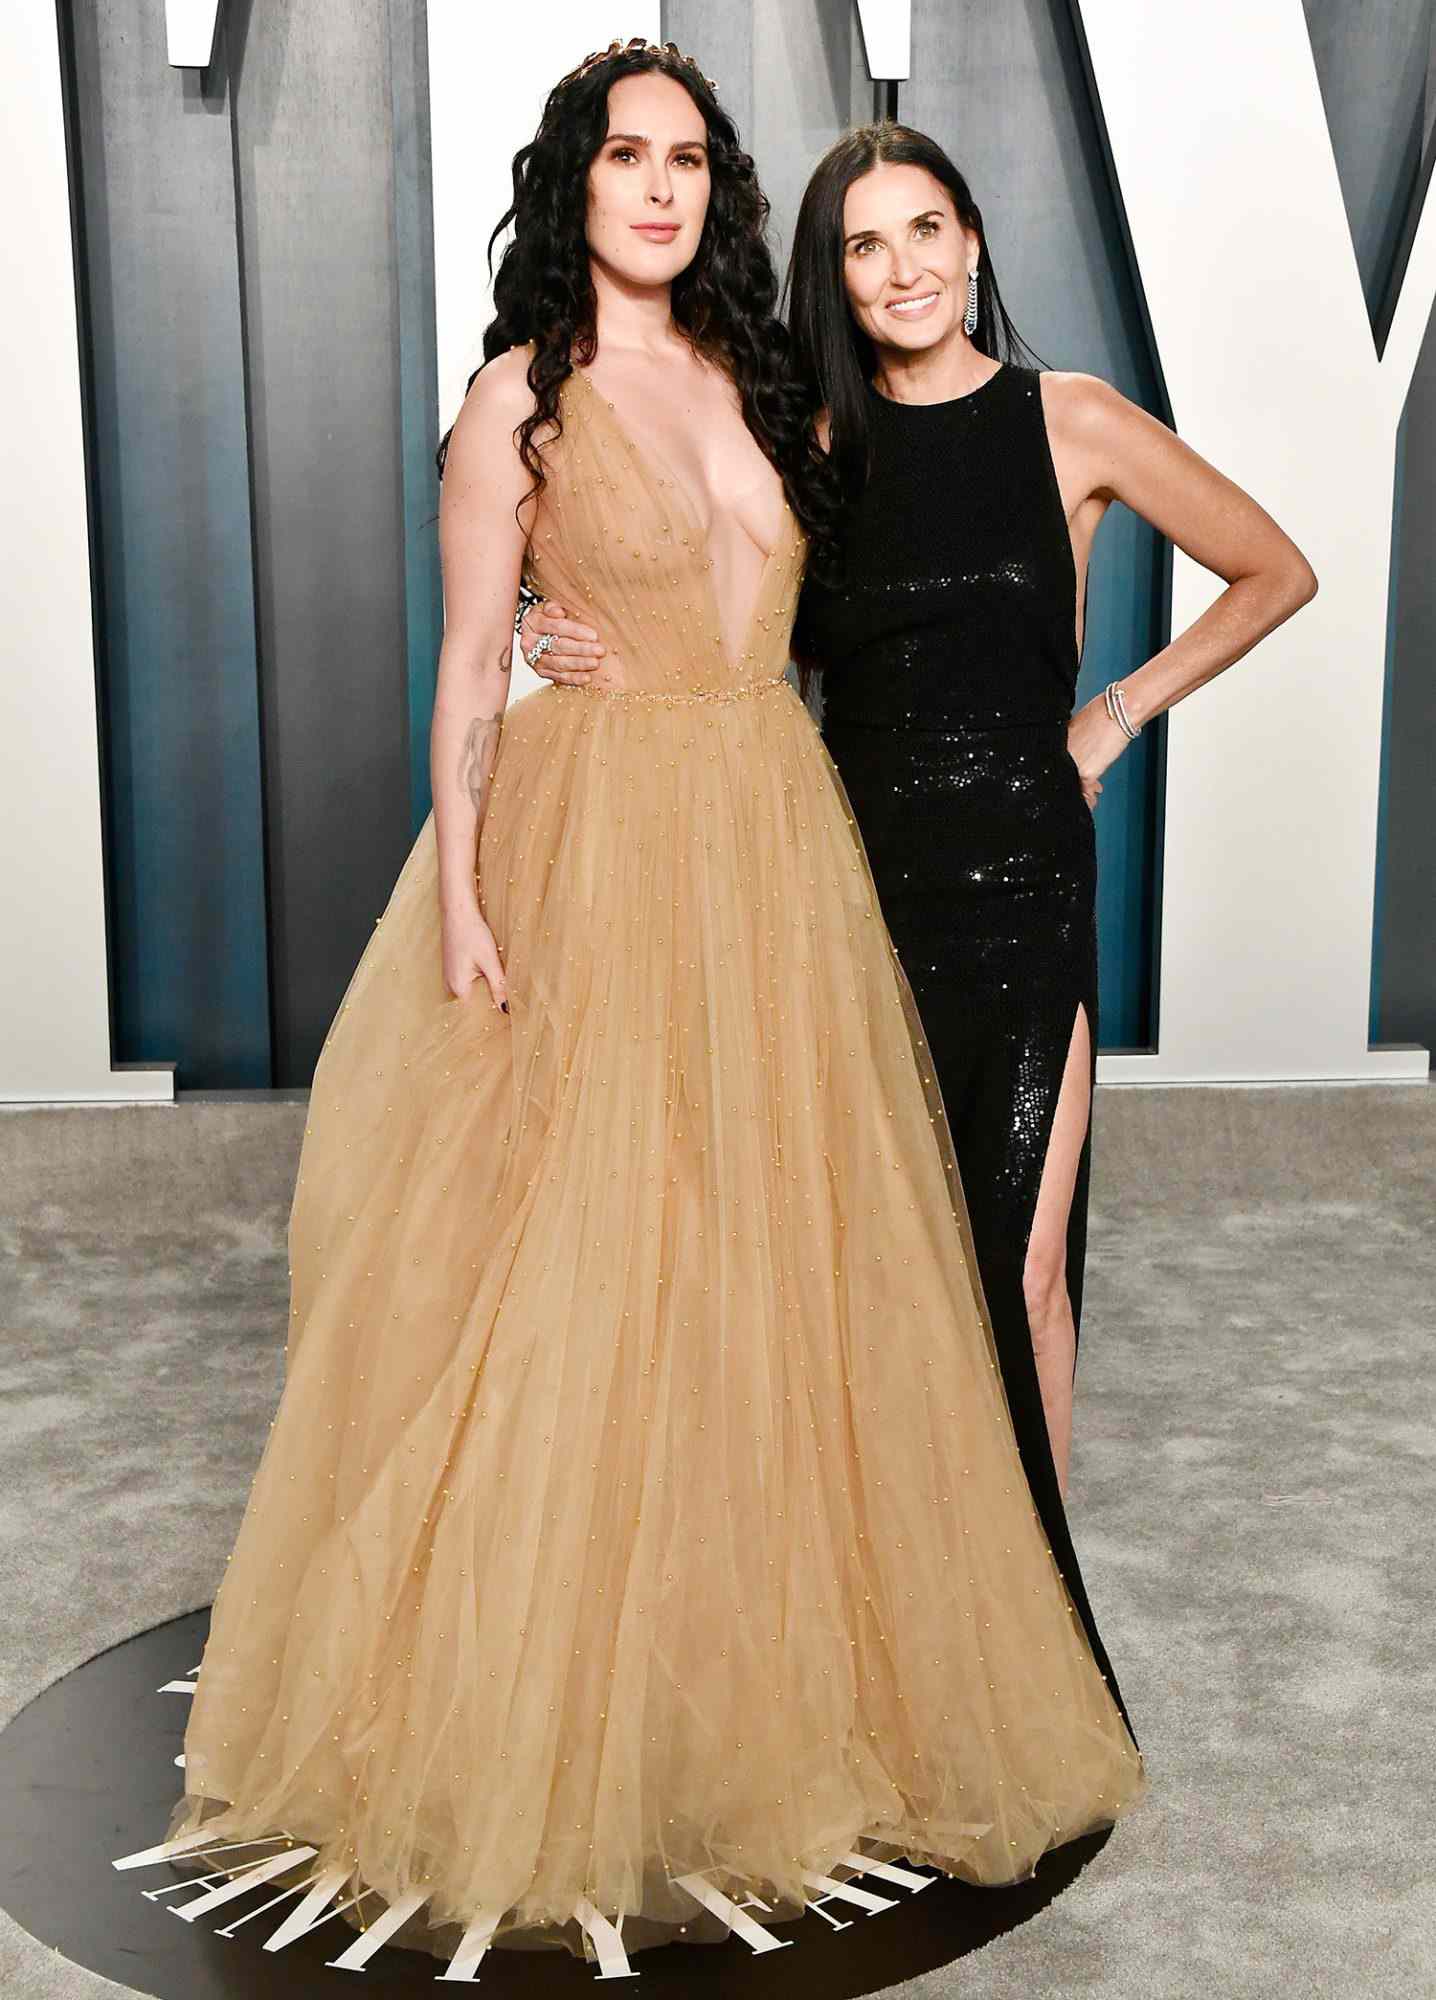 Rumer Willis and Demi Moore attend the 2020 Vanity Fair Oscar Party hosted by Radhika Jones at Wallis Annenberg Center for the Performing Arts on February 09, 2020 in Beverly Hills, California